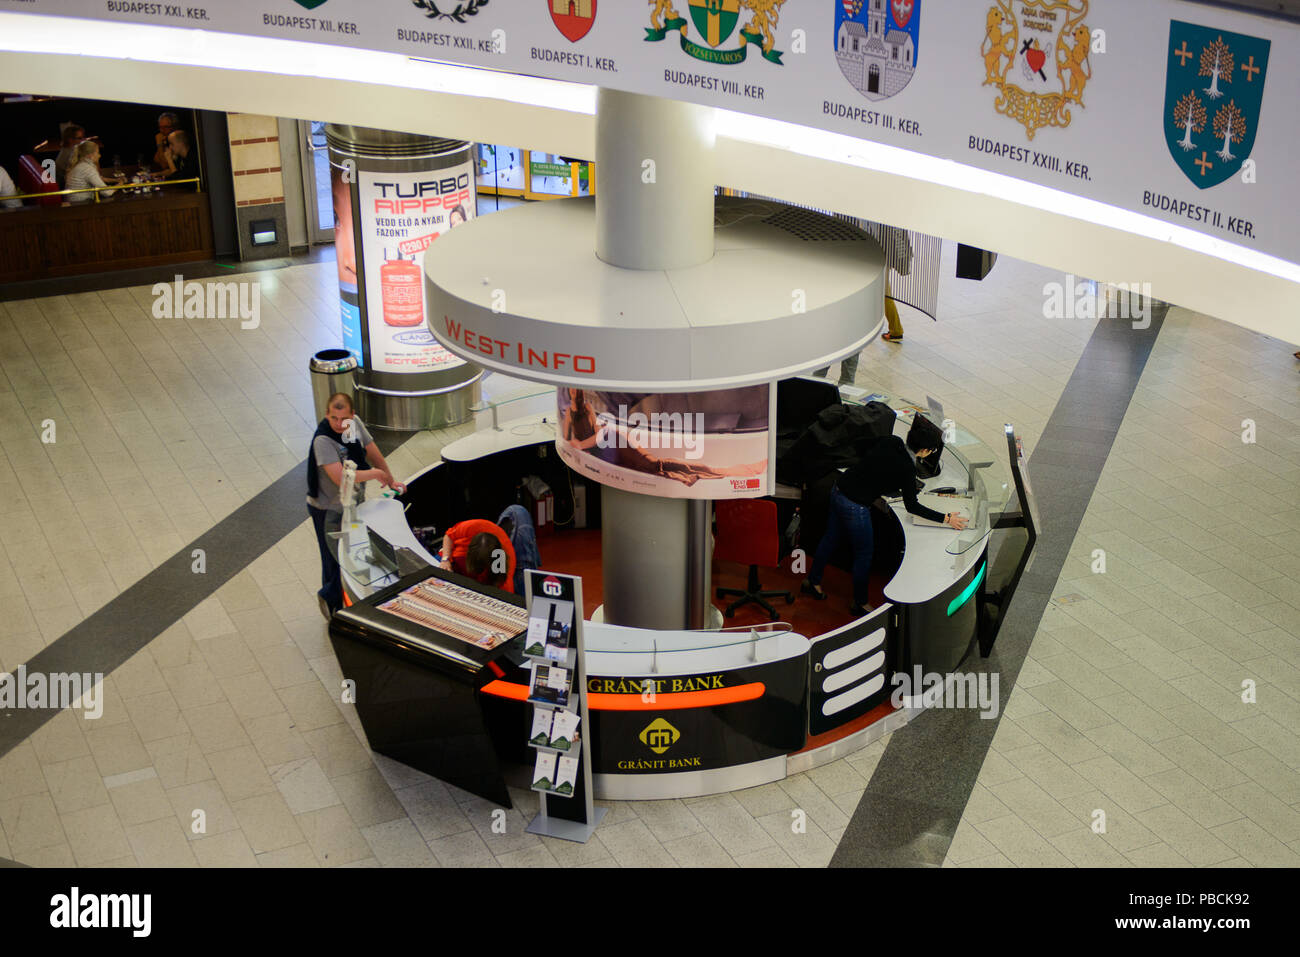 BUDAPEST, HUNGARY - AUG 27, 2014: Information desk in West End City Center,  a shopping centre in Budapest, Hungary. it is the former largest mall in C  Stock Photo - Alamy